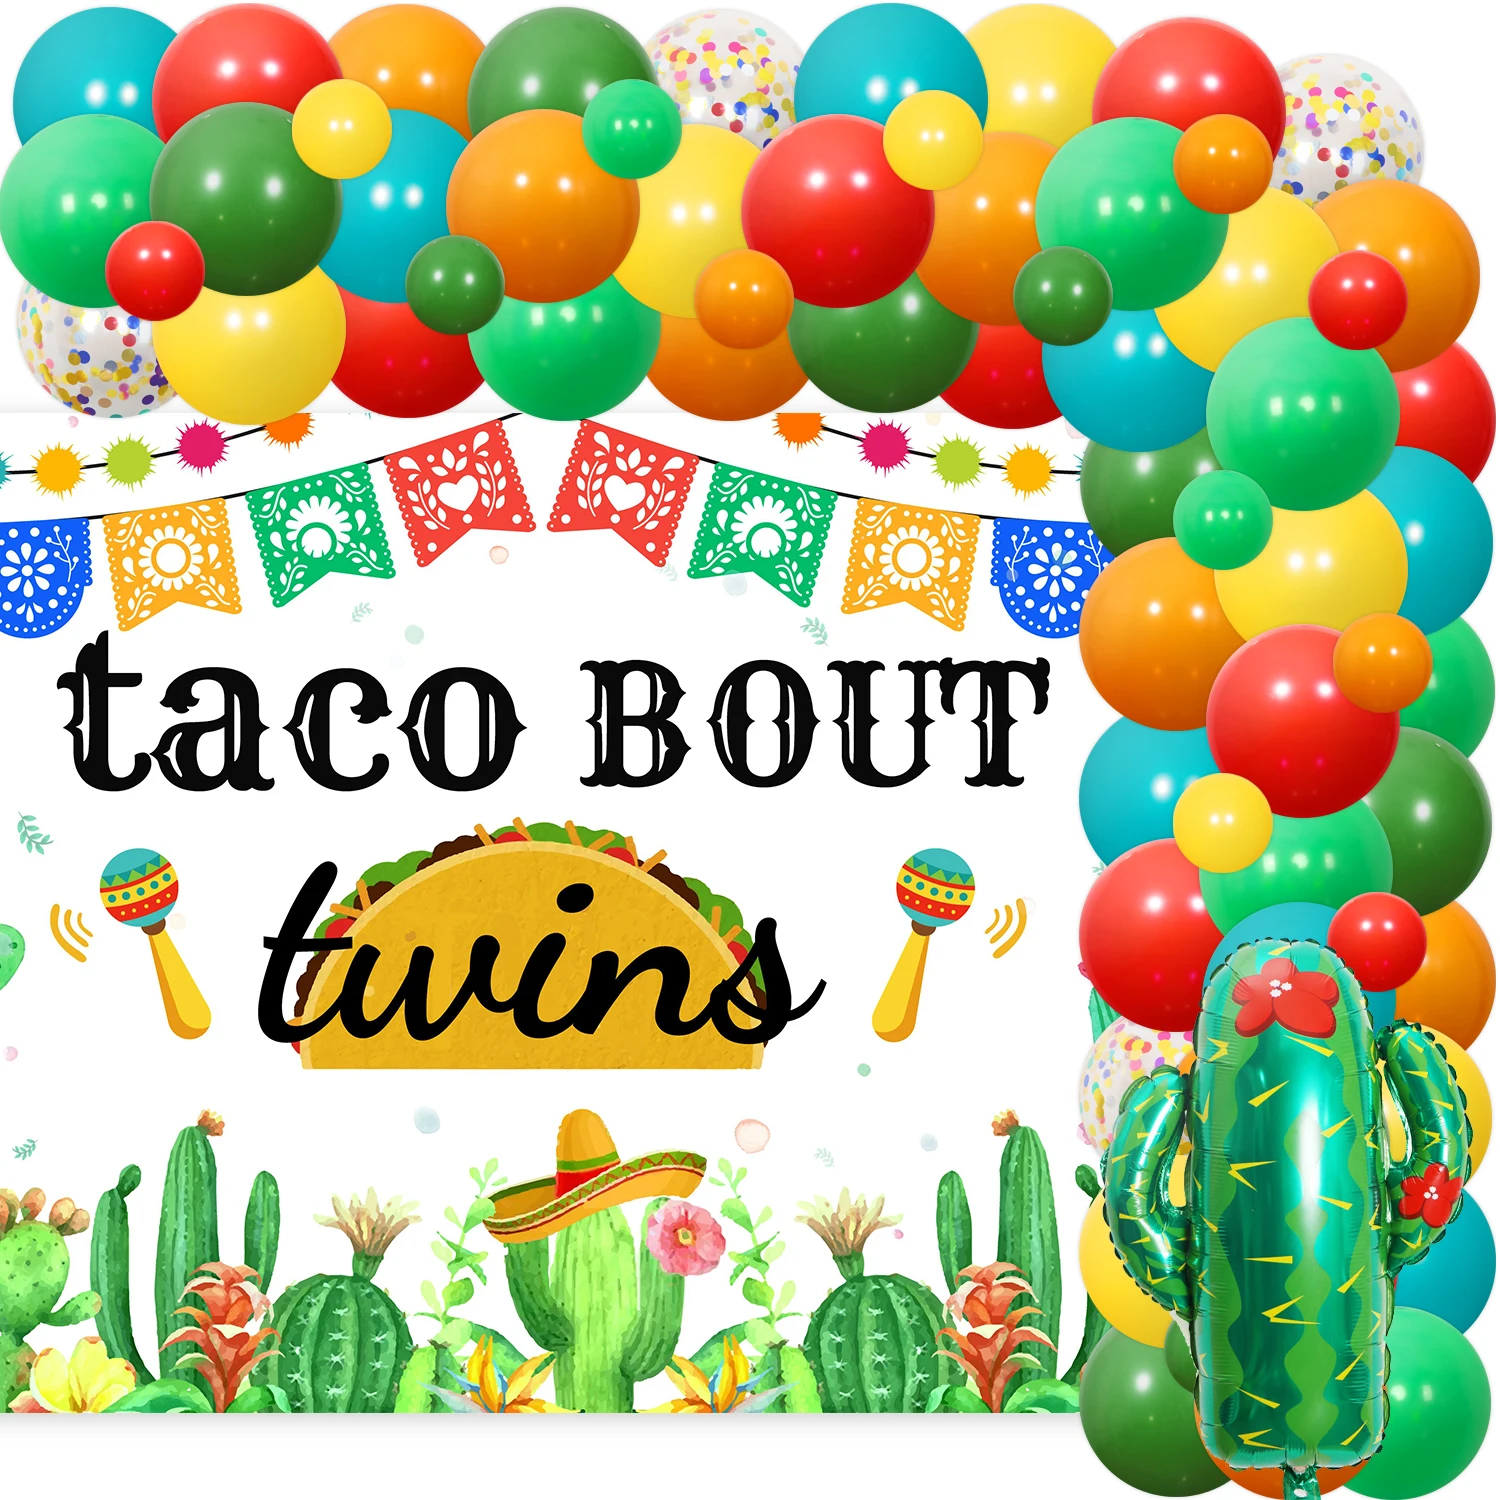 

Taco Bout Twins Decor Mexican Fiesta Twins Baby Shower Balloon Garland Kit with Taco Cactus Foil Balloons Party Supplies